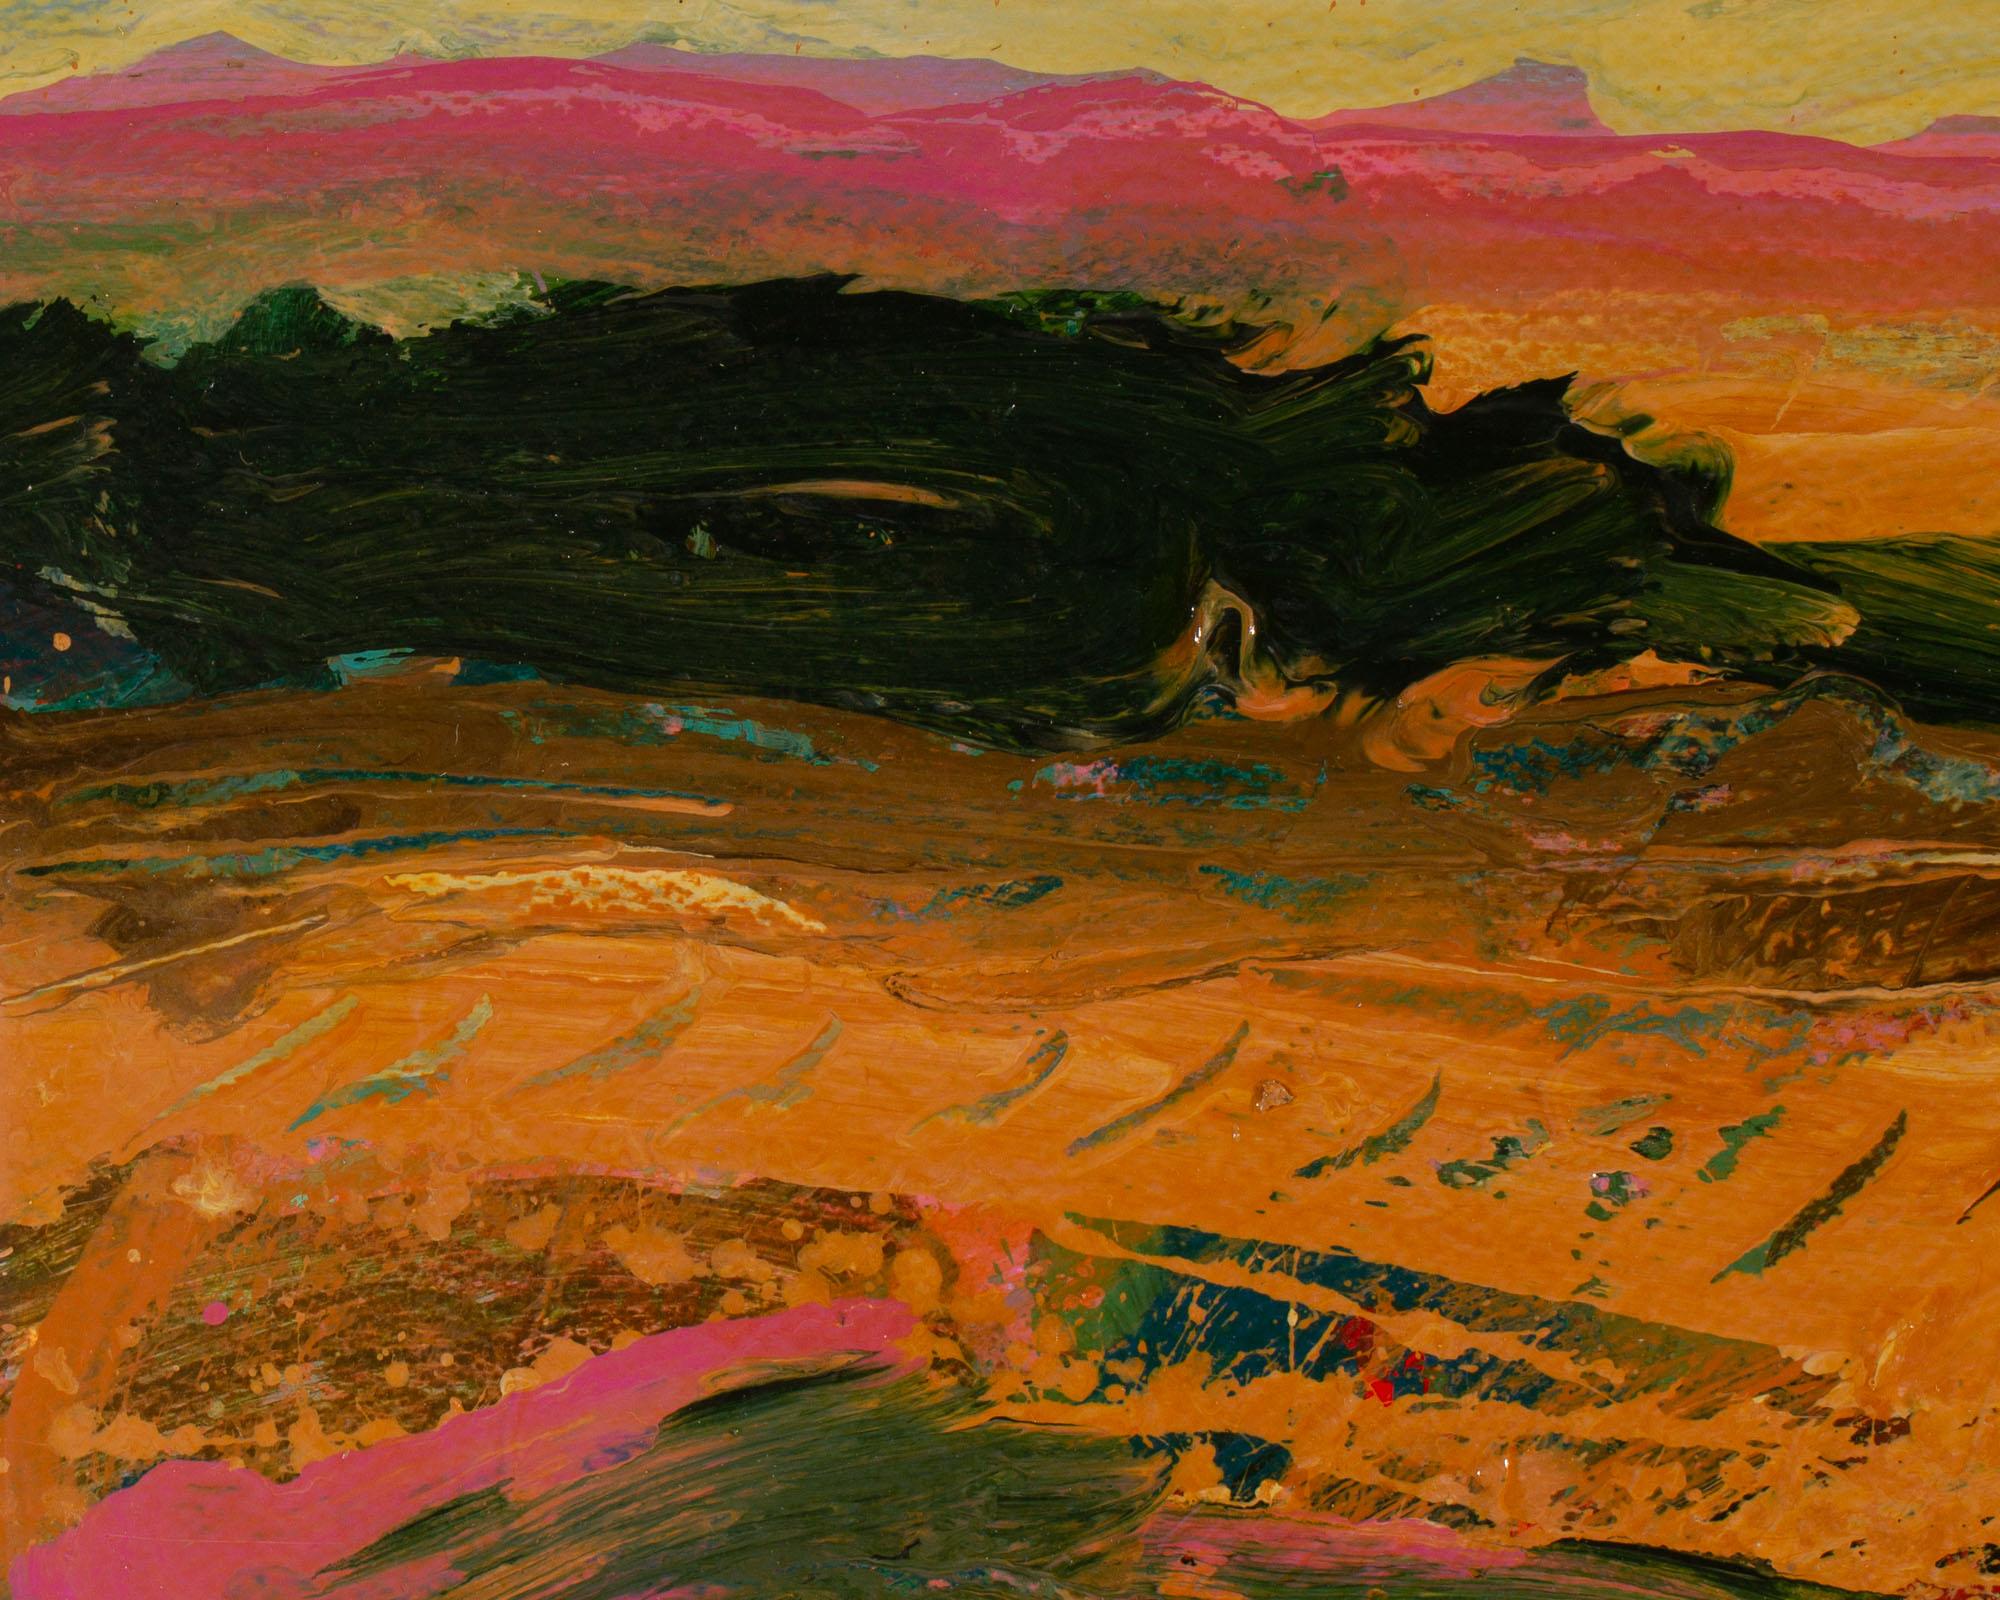 A 1980s abstract acrylic on paper mountainous landscape painting titled Northwest by American artist Harry Hilson (1935-2004). Gestural lines come together to create a vibrant abstract landscape with pink distant mountains in the background and